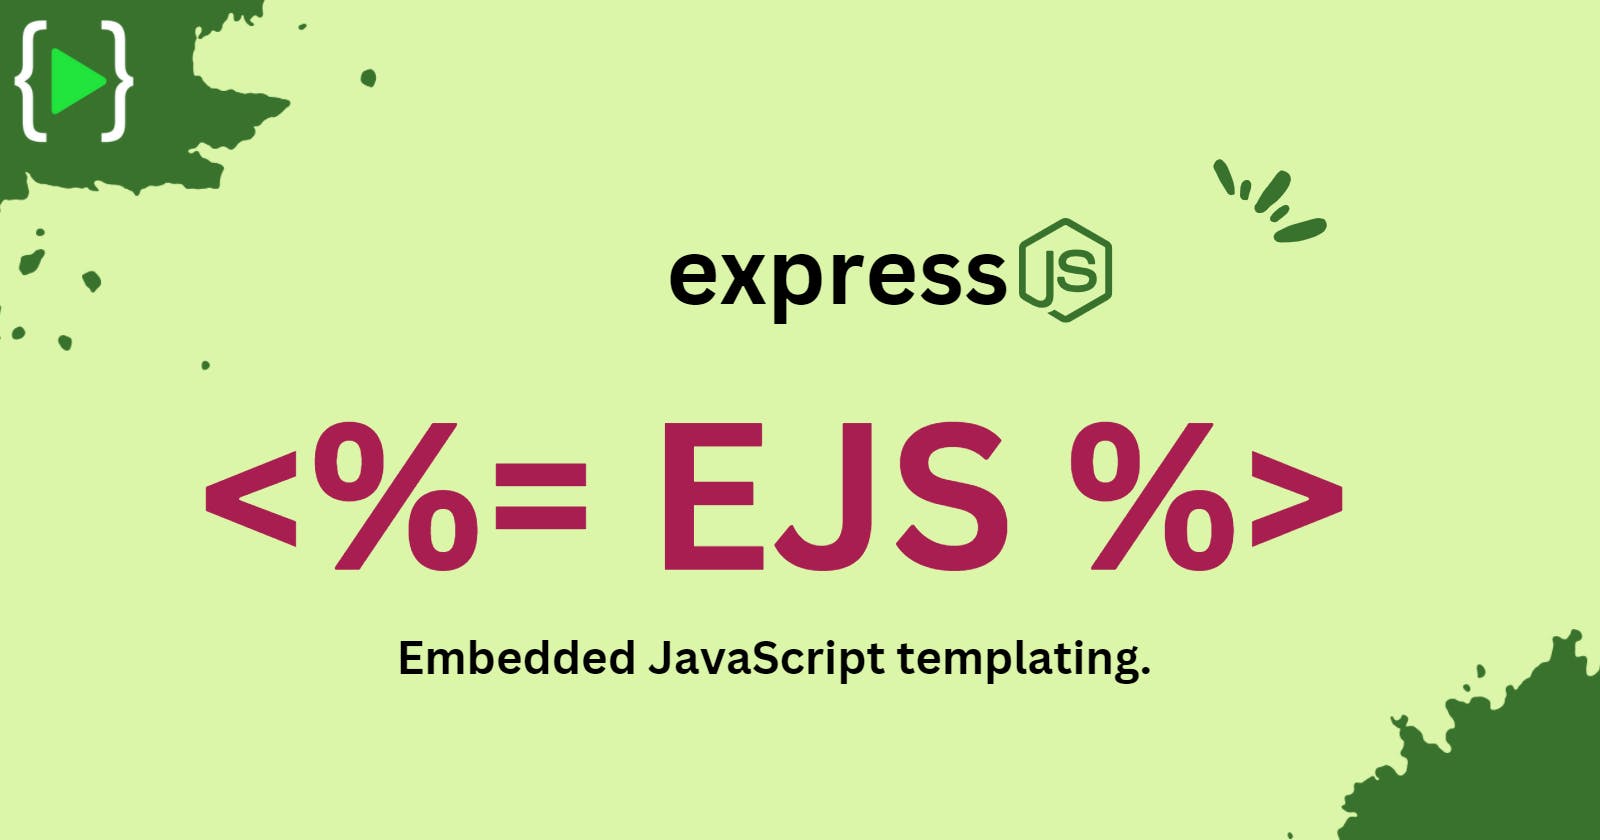 Using EJS as a Template Engine in your Express App